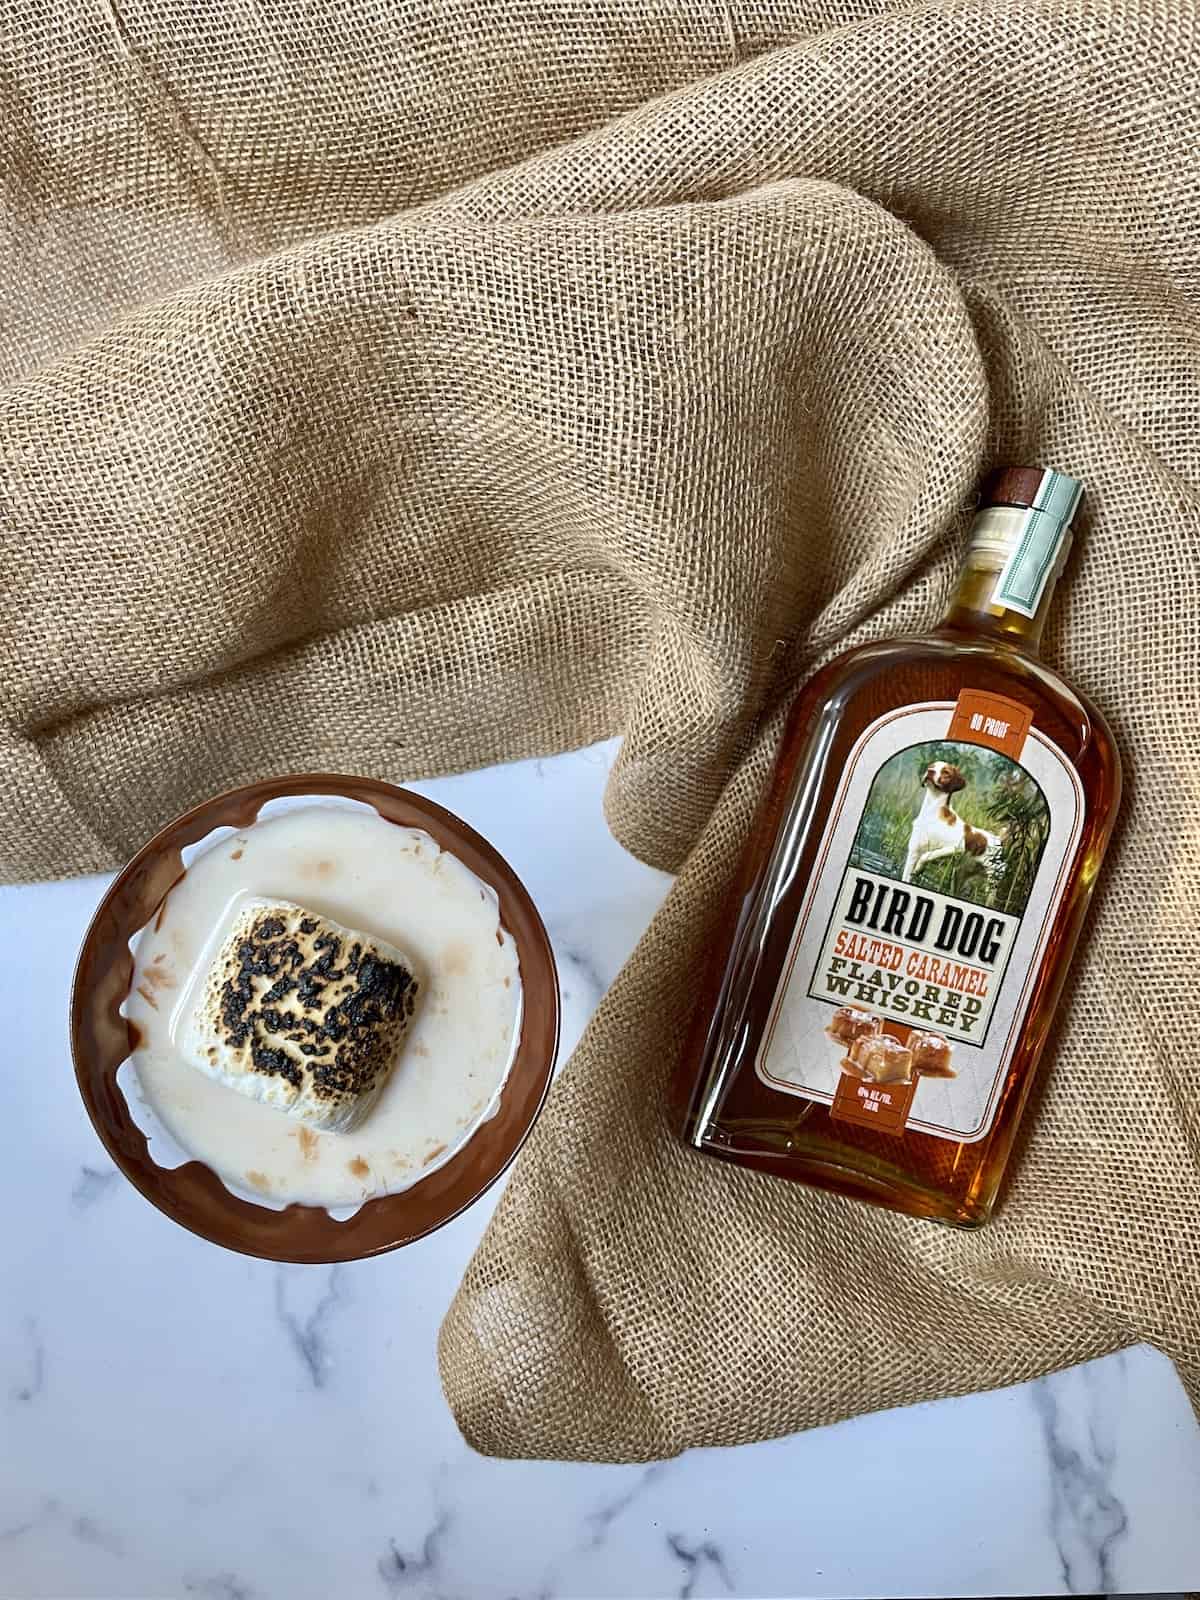 Cocktail topped with a marshmallow and a bottle of whiskey on burlap.